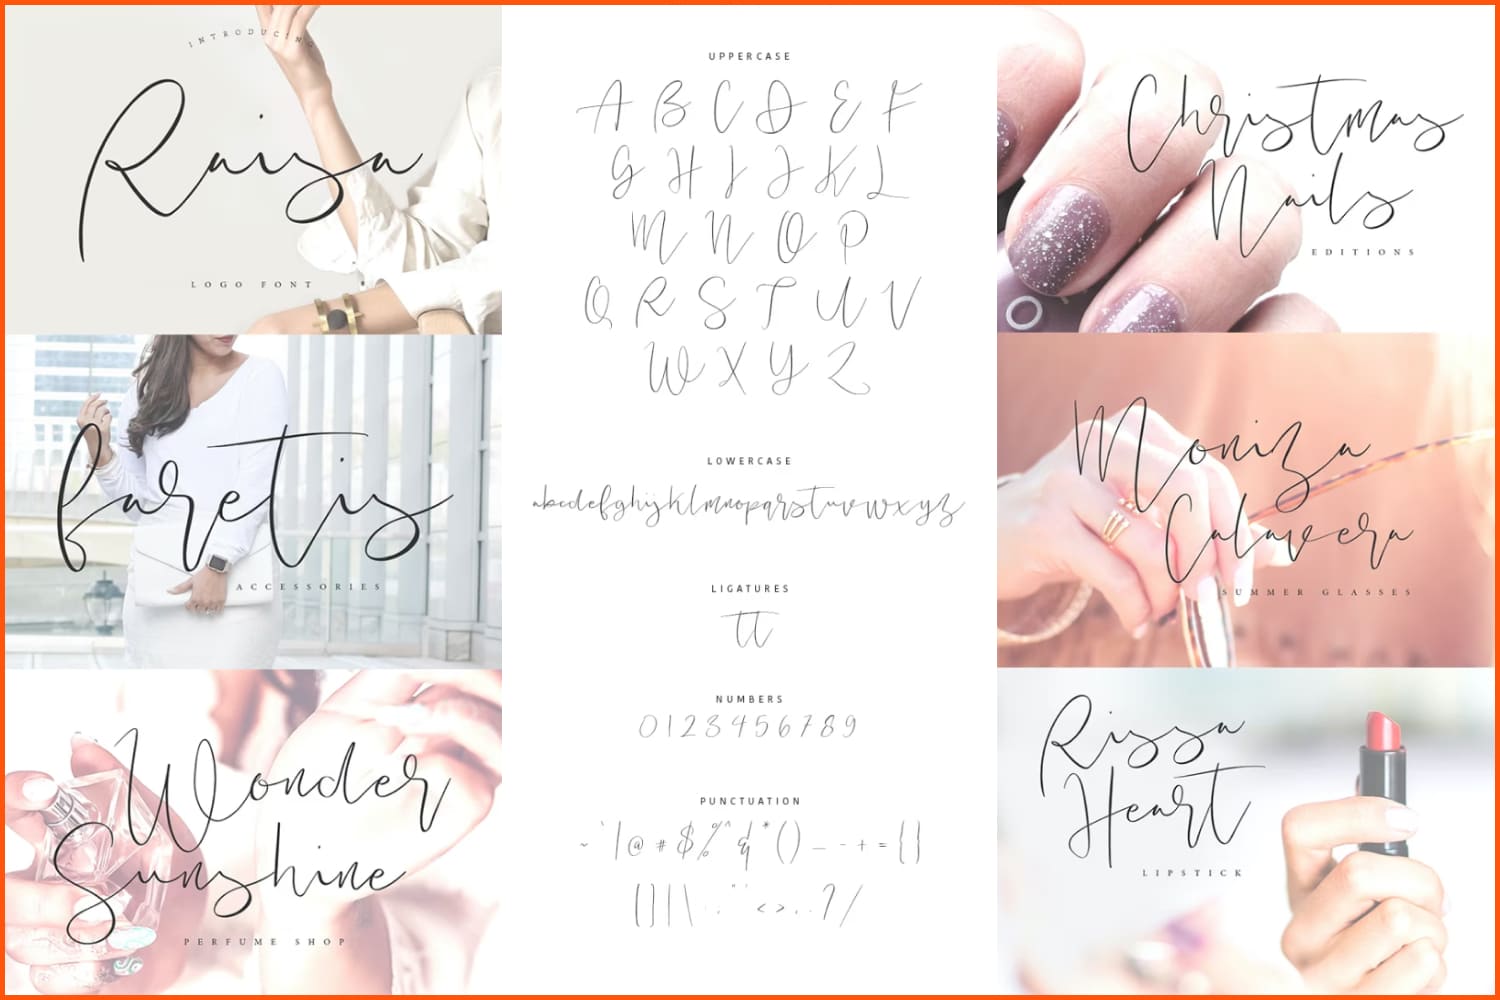 A collage of images of handwritten text in the Raisa font on the background of photos of hands and a girl.